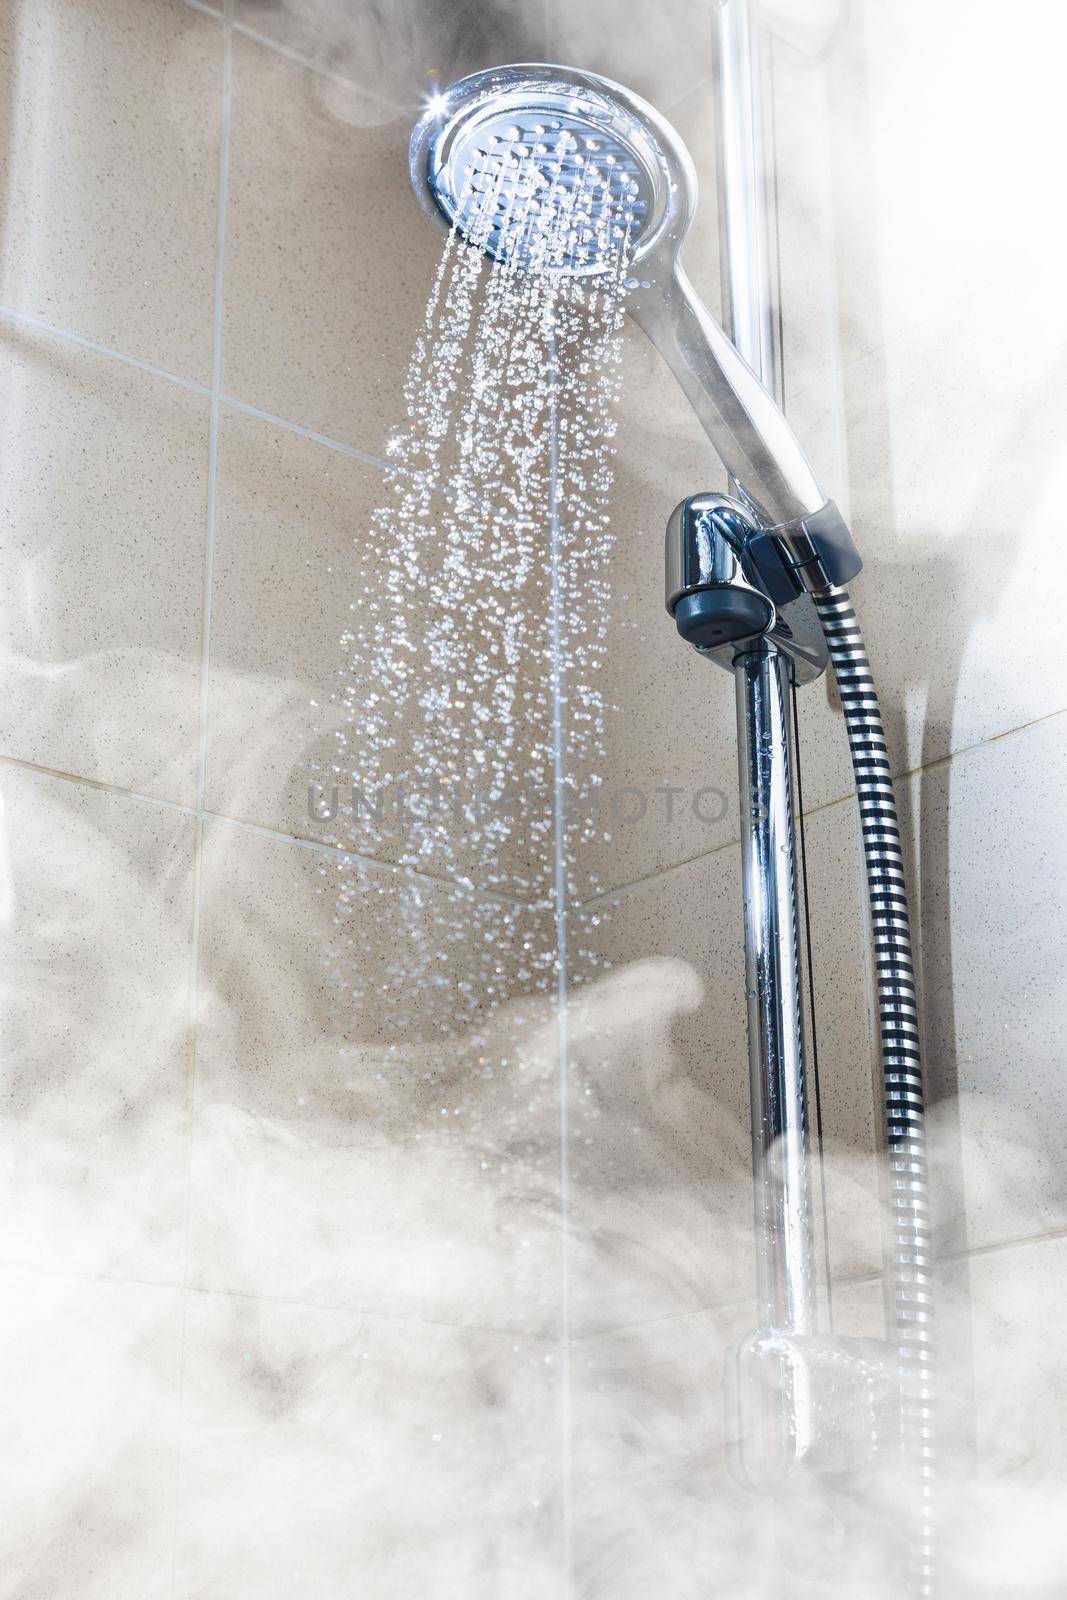 contrast shower with flowing water and steam by nikkytok